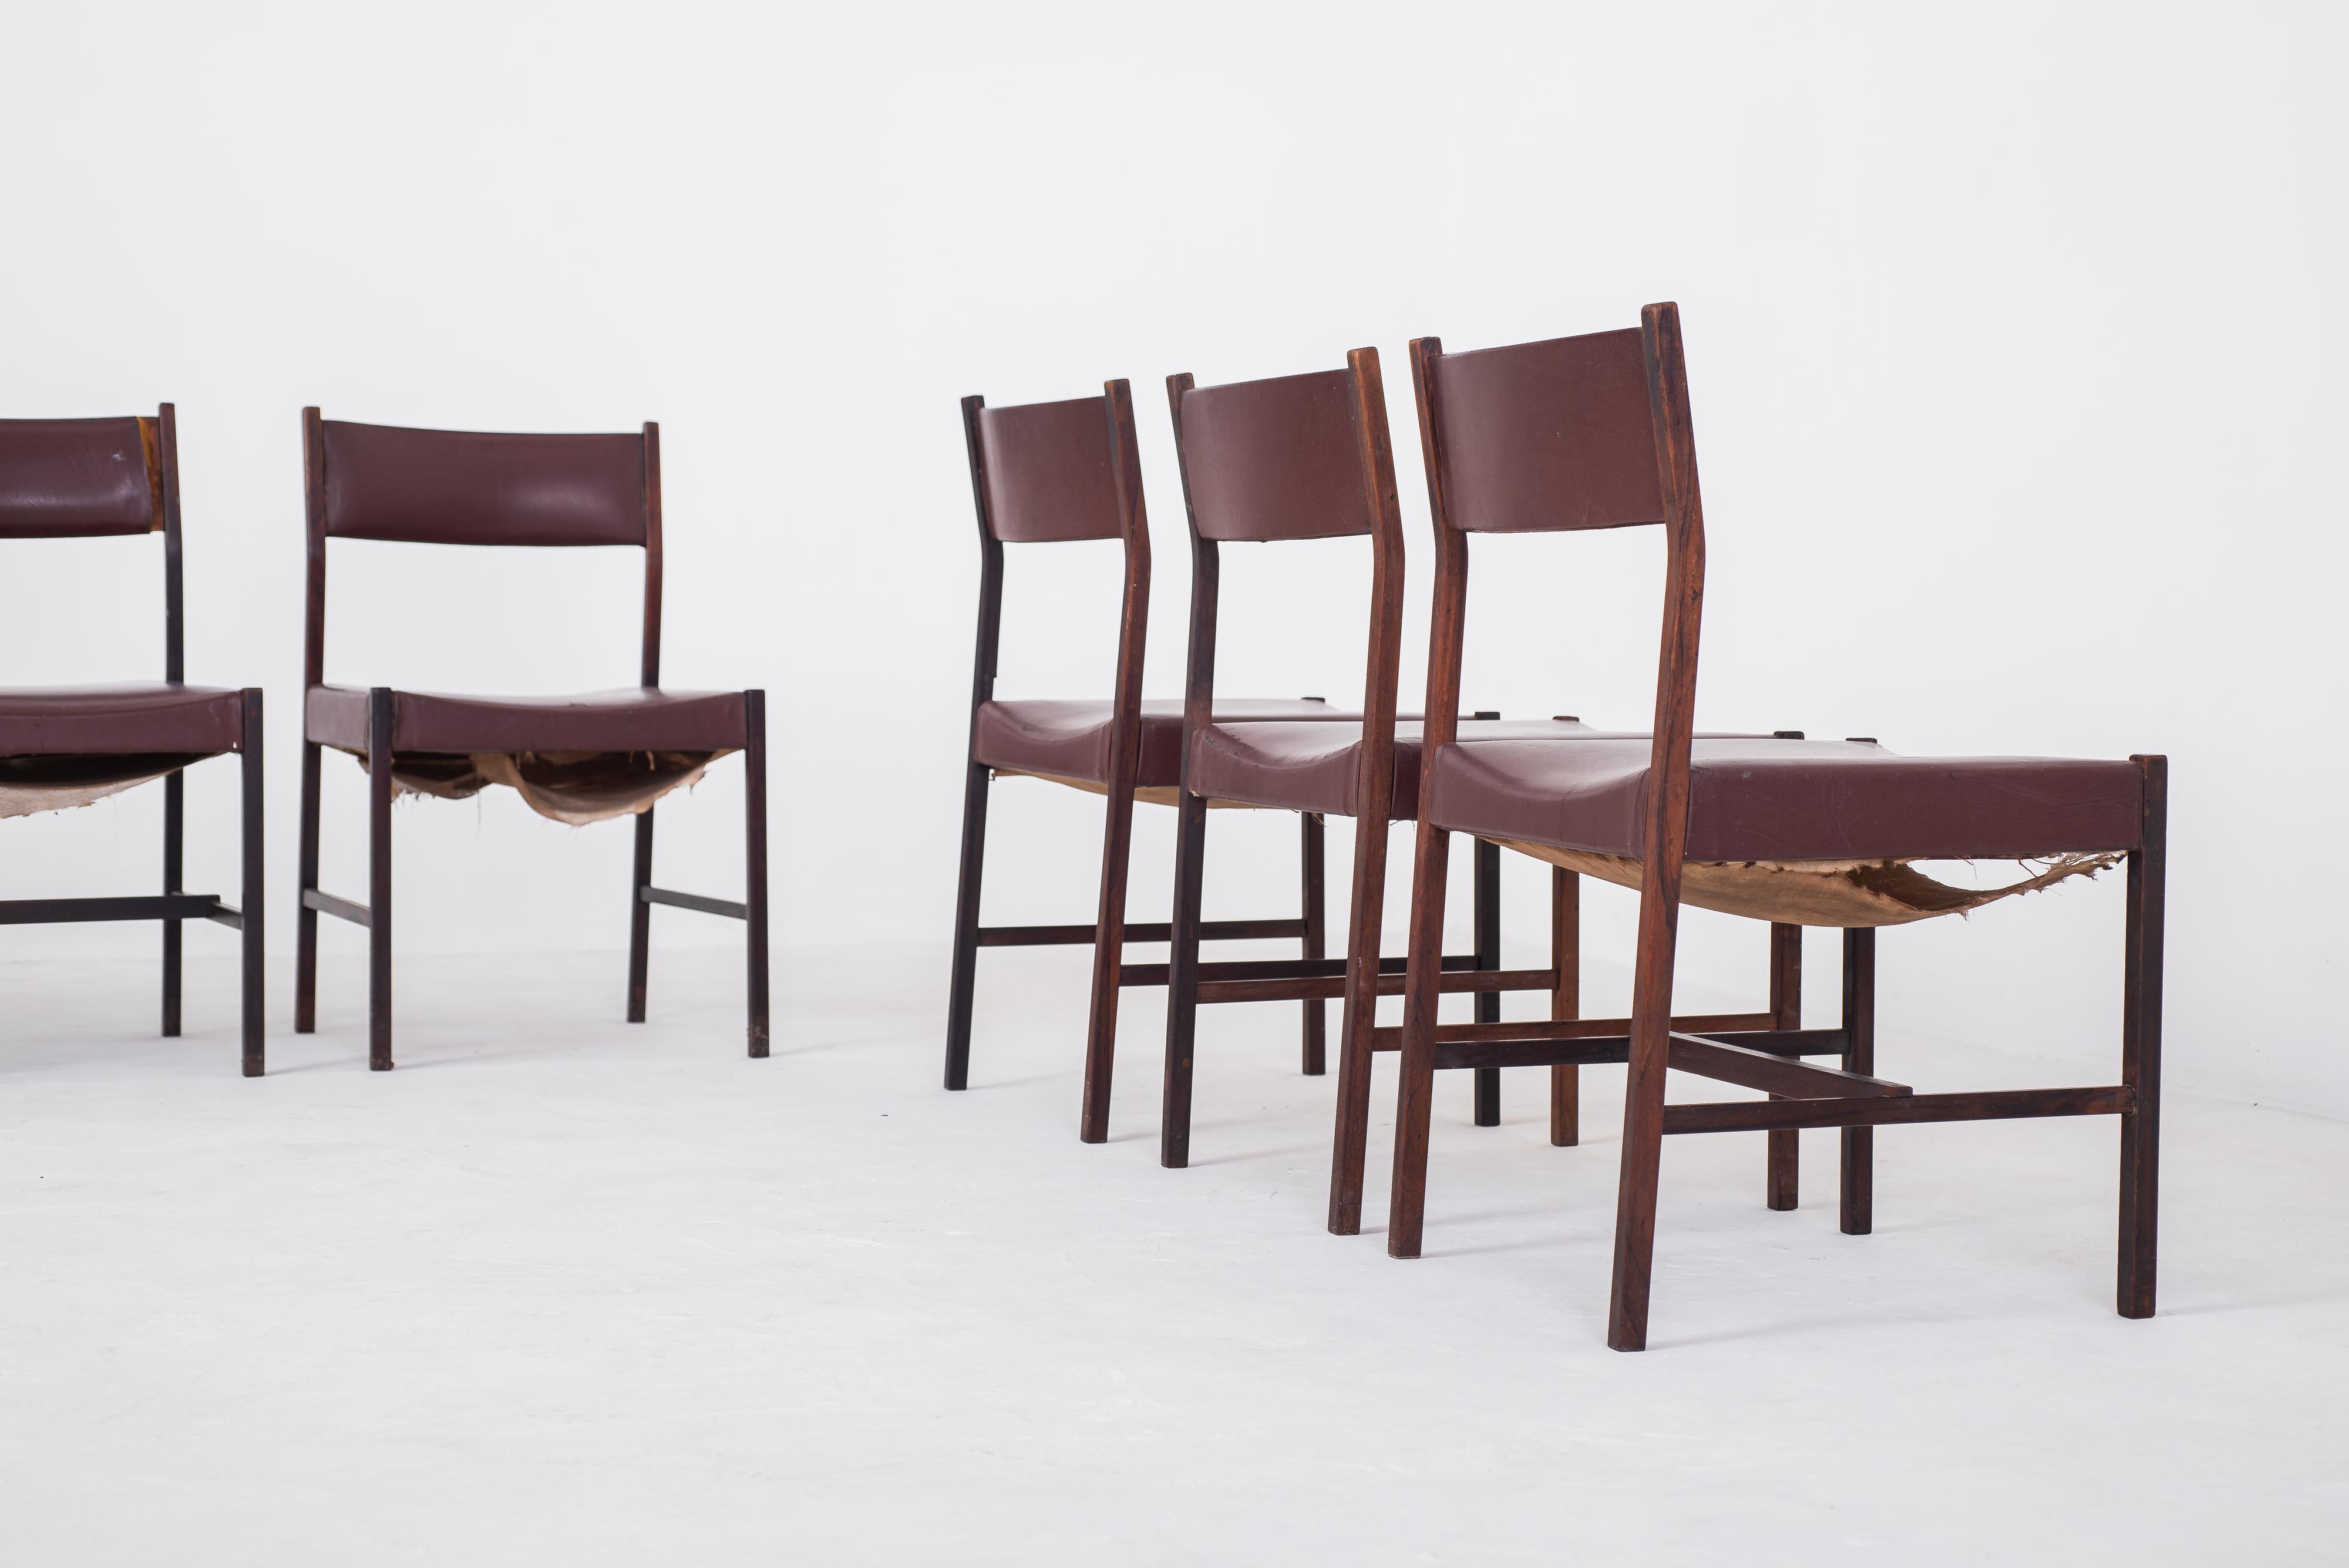 In 1959, Jorge Zalszupin conceived a piece, for L'atelier that encapsulates comfort and elegance. Crafted with a wood foundation, this creation boasts a graceful leather back and seat adorned with exquisite stitching. Notably, the term 'Itamaraty,'